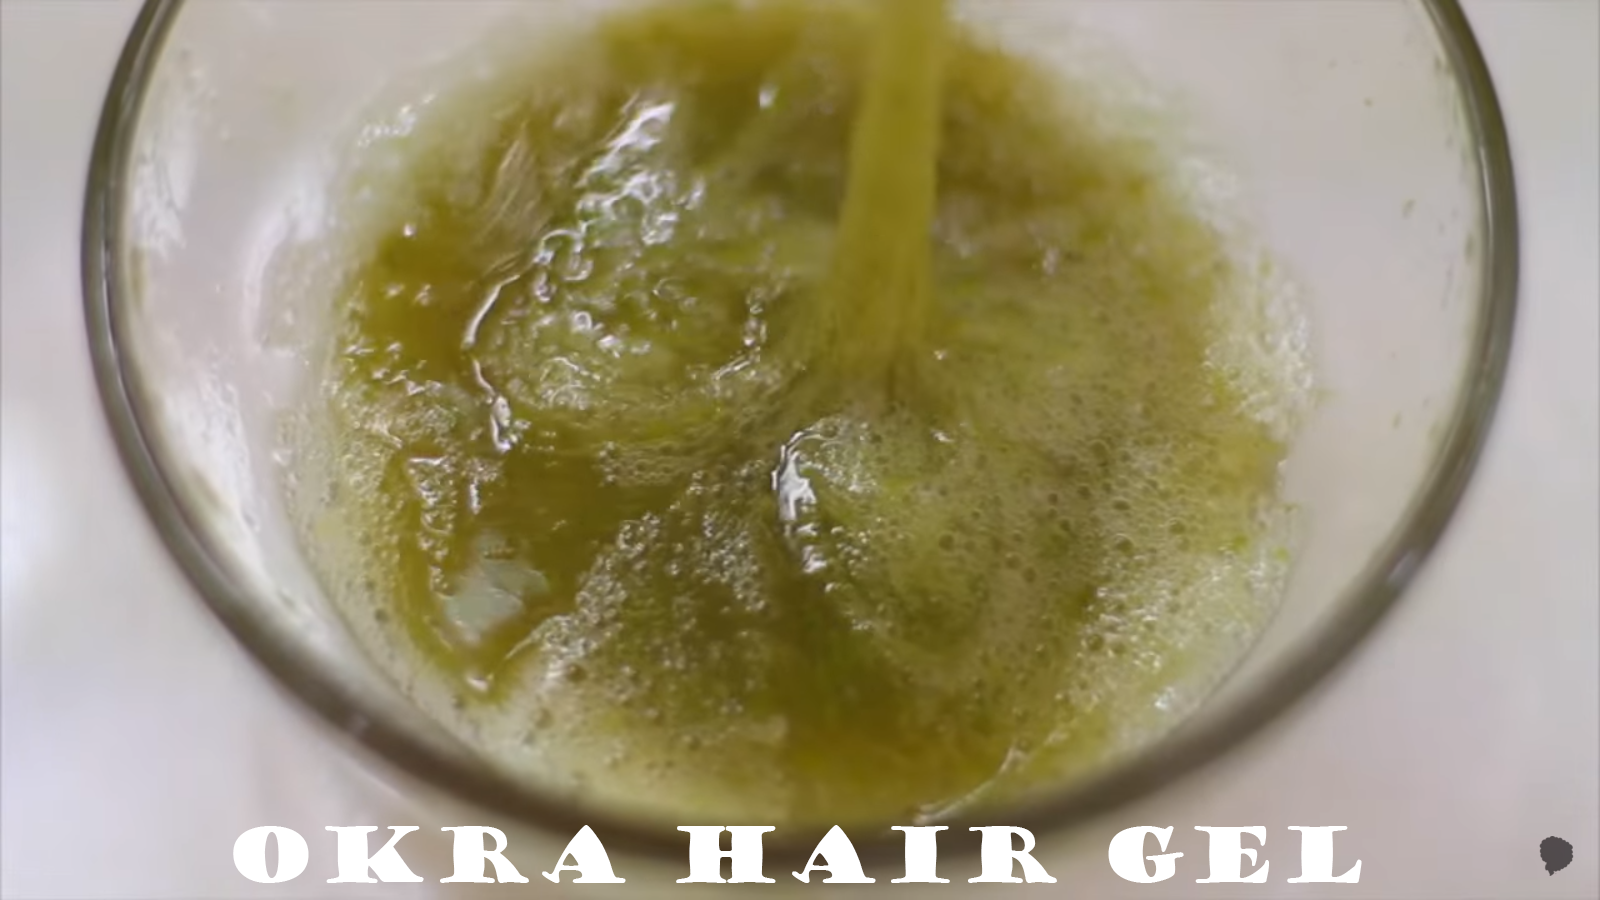 Easiest Way To Make Okra Hair Gel For Kinky Curly Hair That You Definitely  Didn't Know Before Today ⋆ African American Hairstyle Videos - AAHV